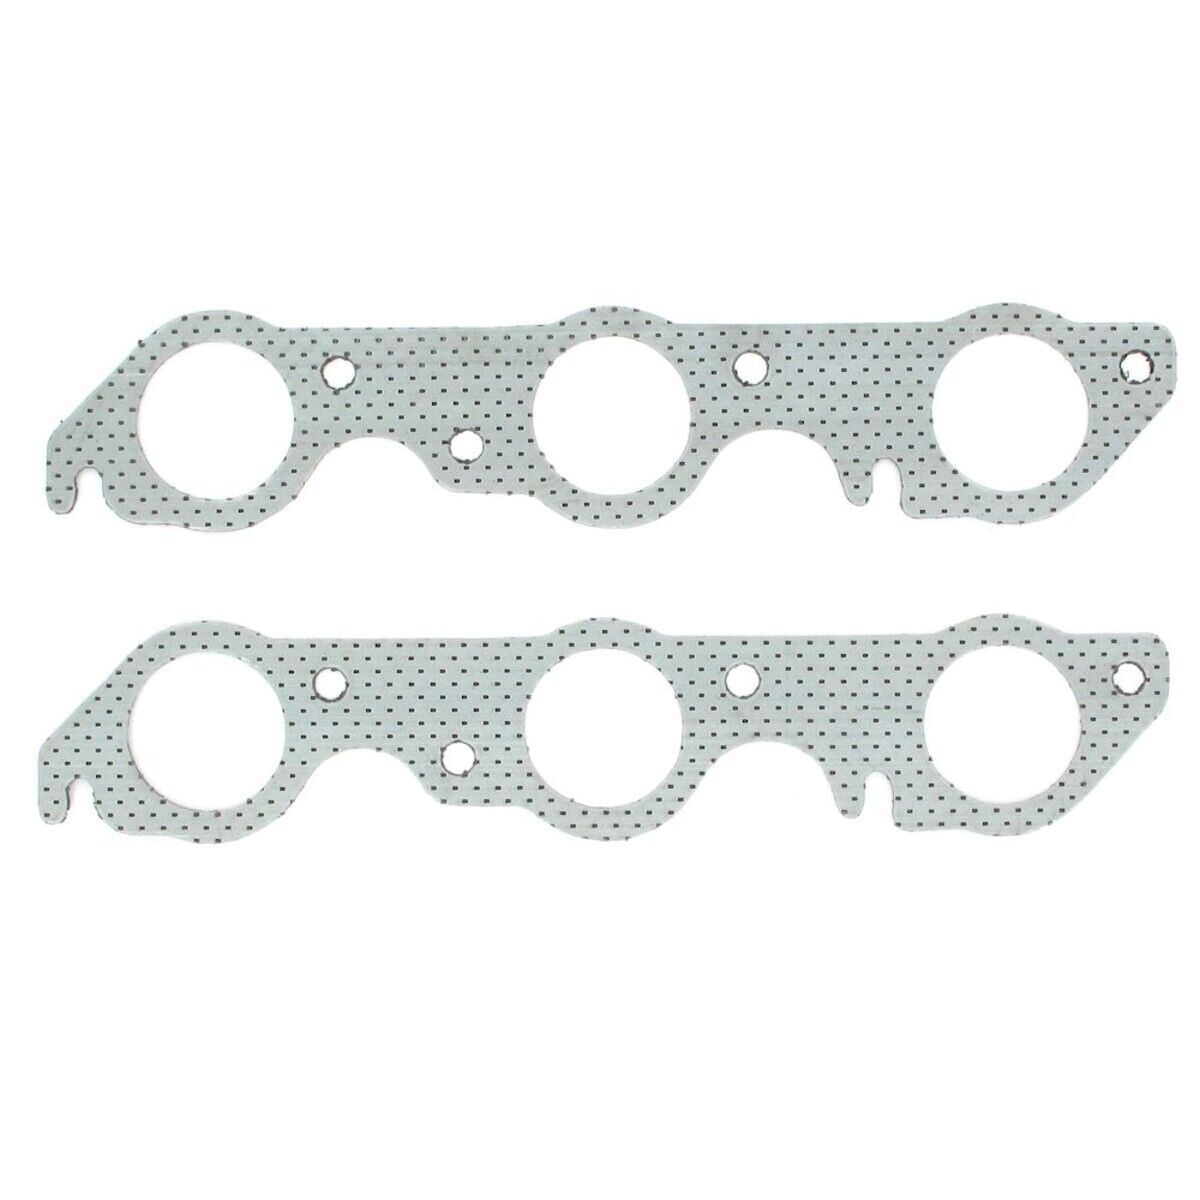 AMS3592 APEX Set Exhaust Manifold Gaskets for Chevy Olds Le Sabre NINETY EIGHT